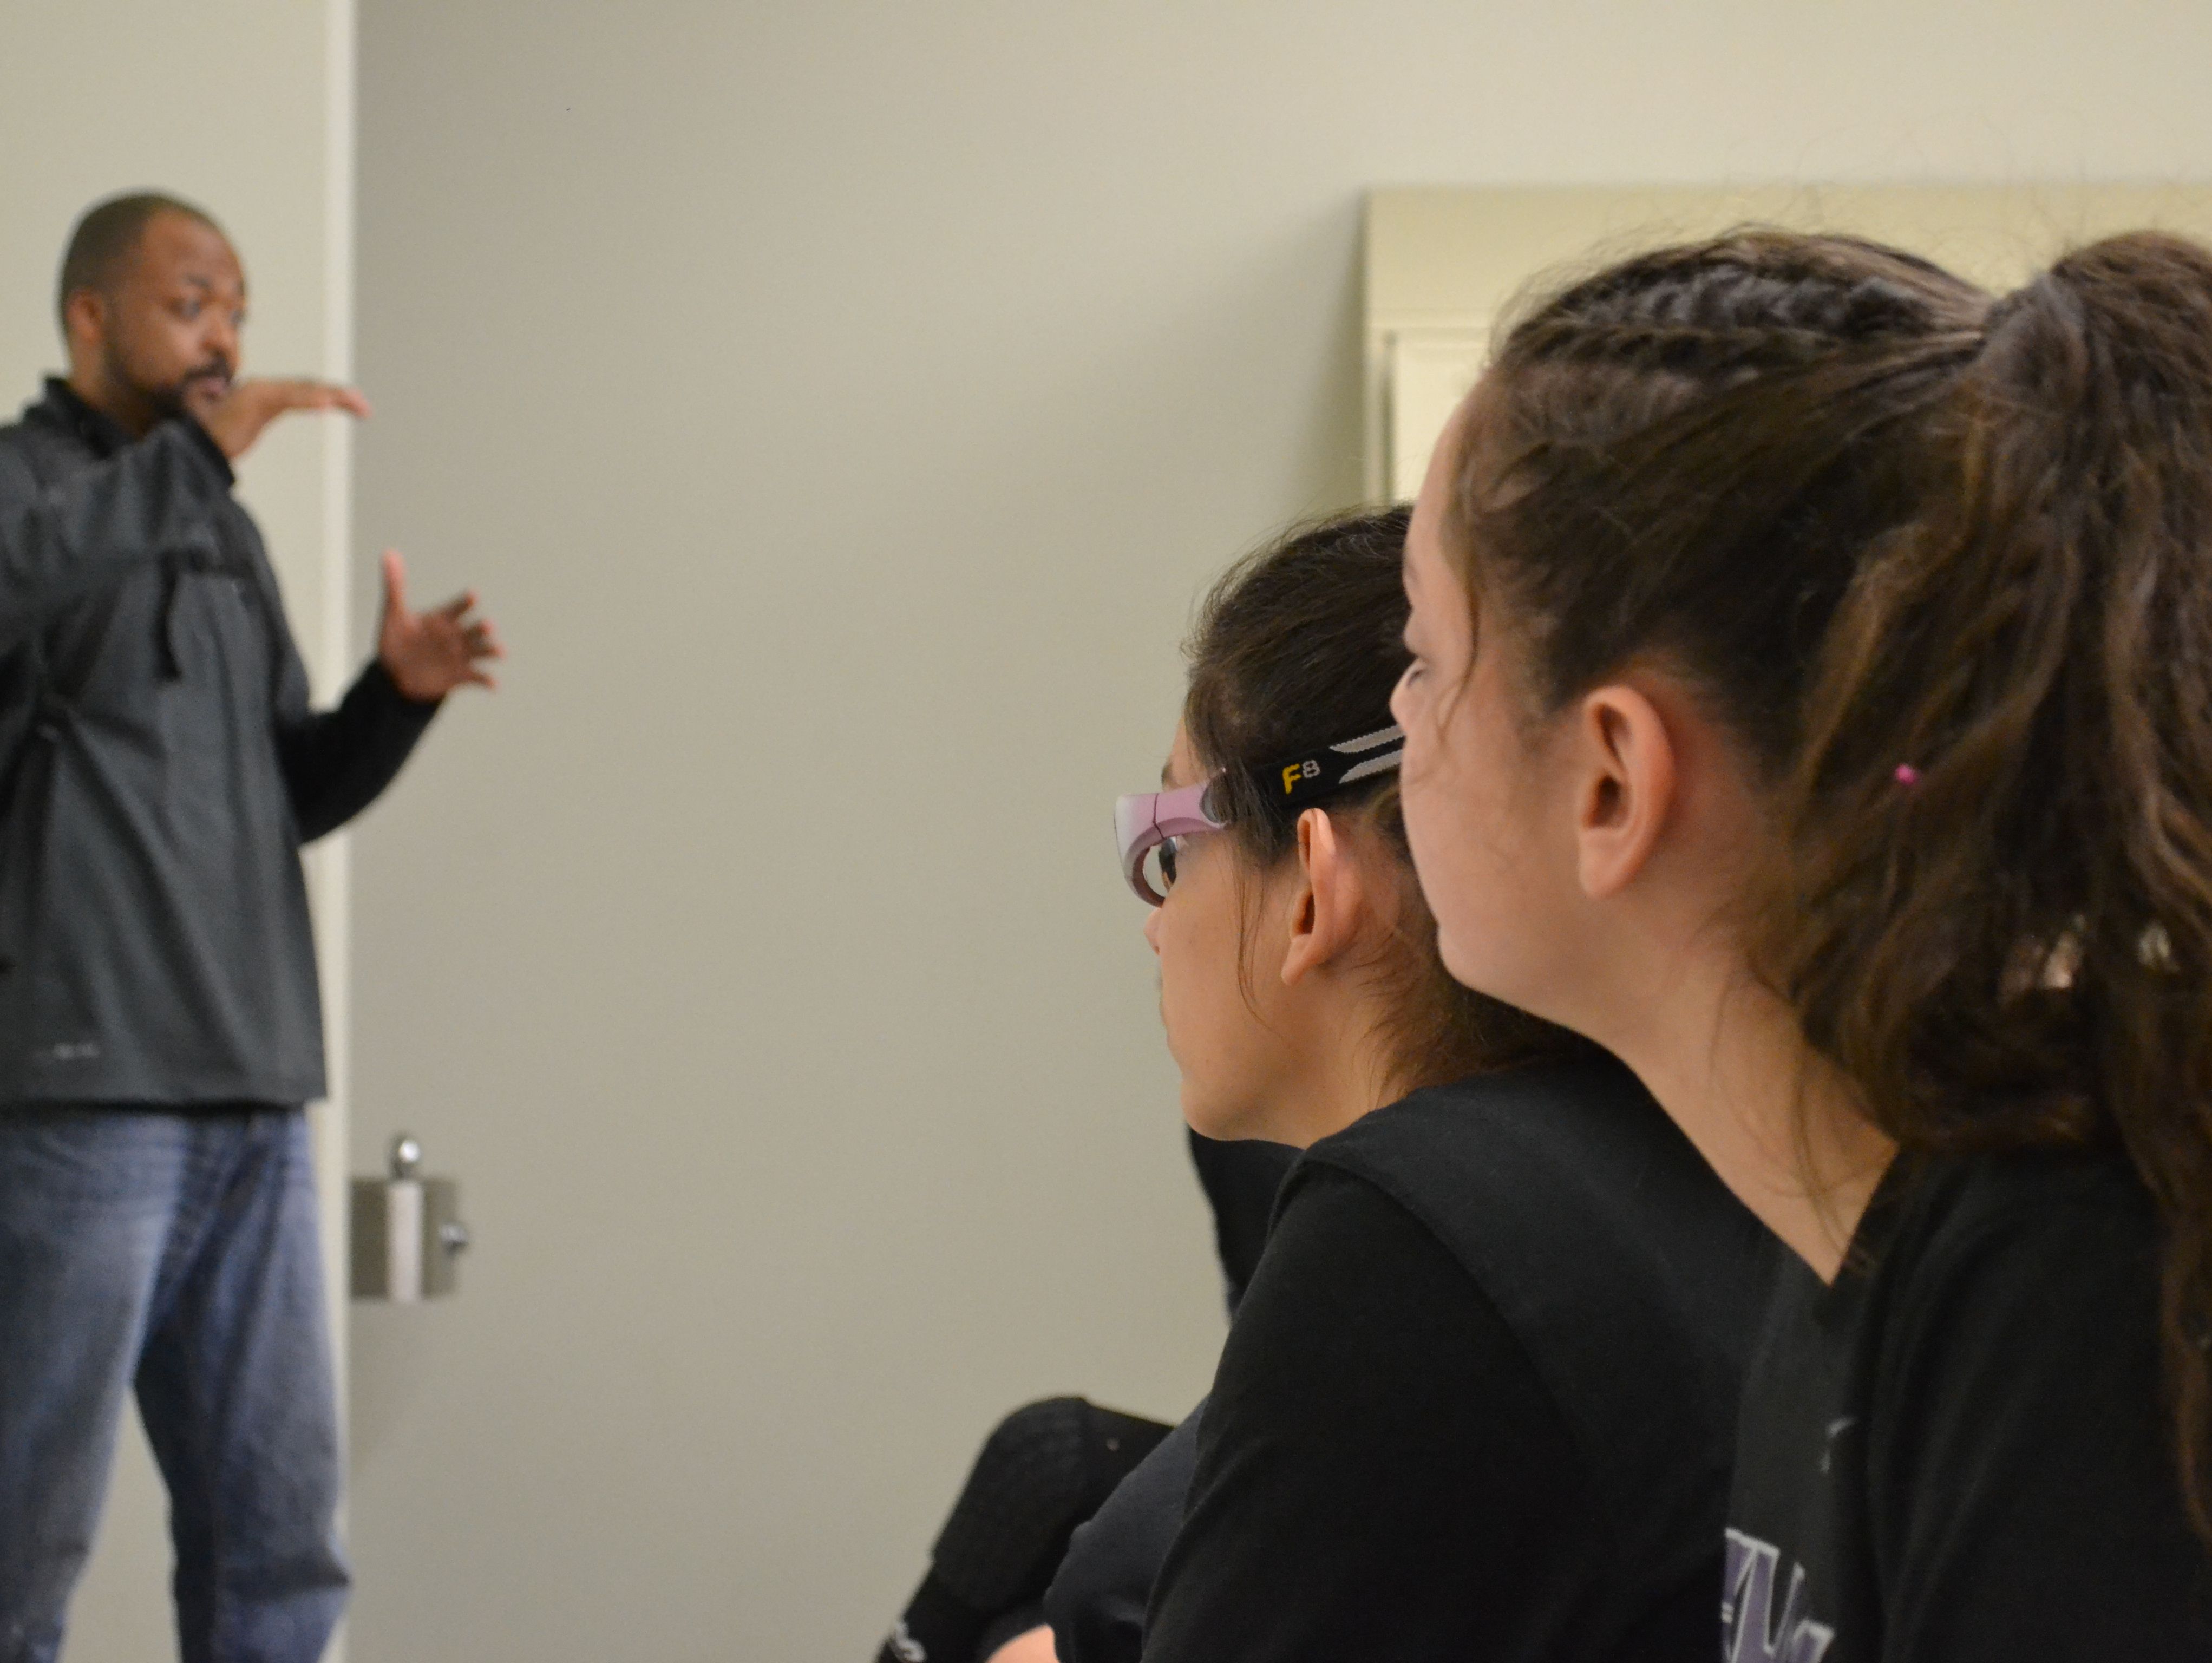 Sisters Mireya (goggles) and Valerie Phlaum, who were born deaf and are on the Shadow Hills girls' basketball team, look on as coach Thaddis Bosley gives instructions.